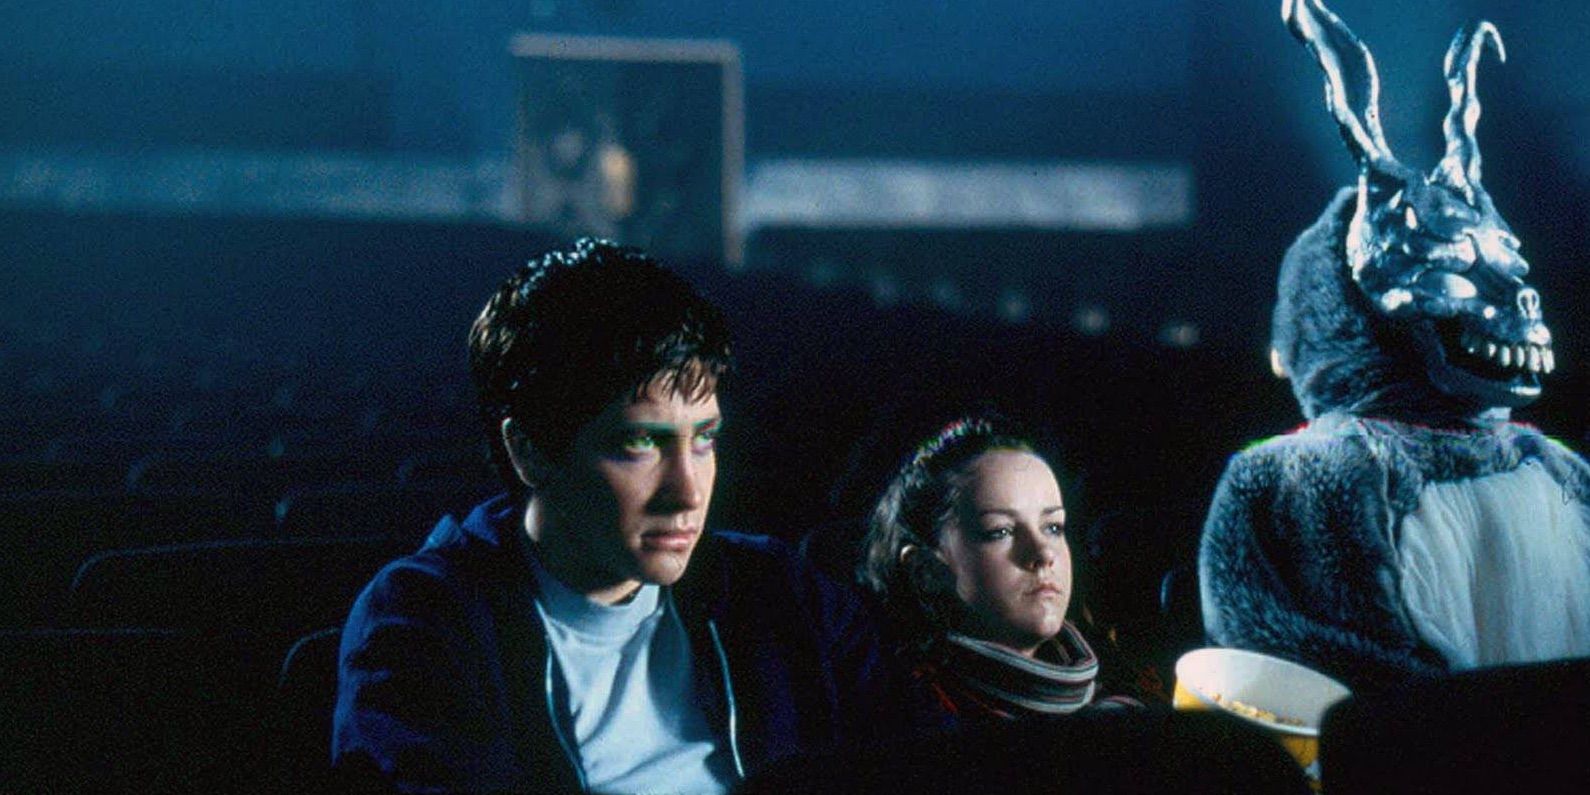 Jake Gyllenhaal and Jena Malone in Donnie Darko in a movie theater